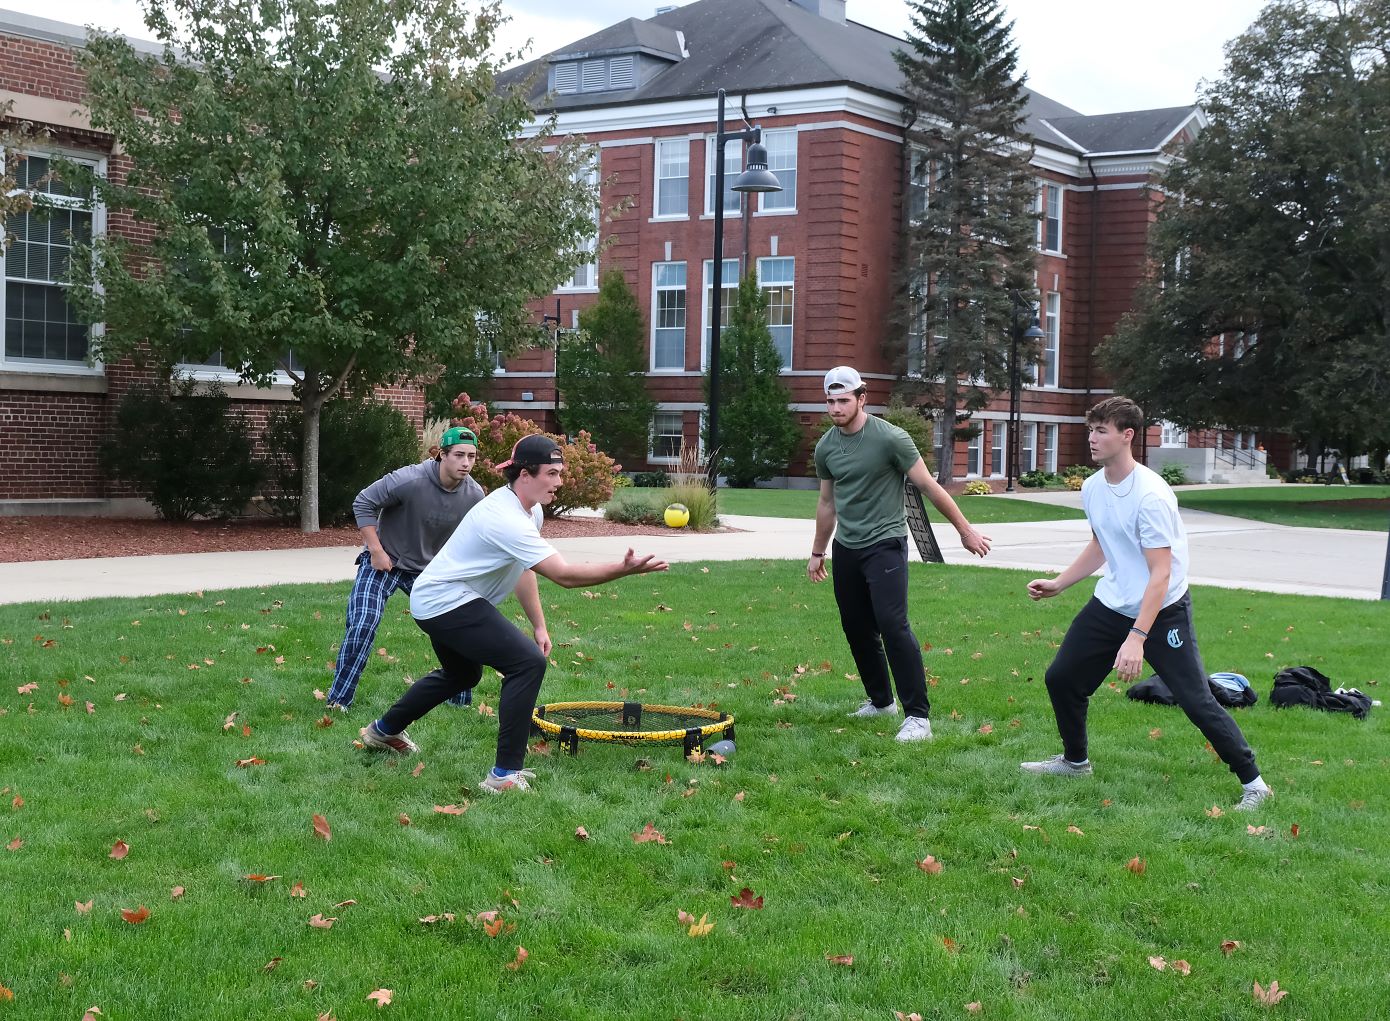 Around Campus - Spike Ball on the Quad